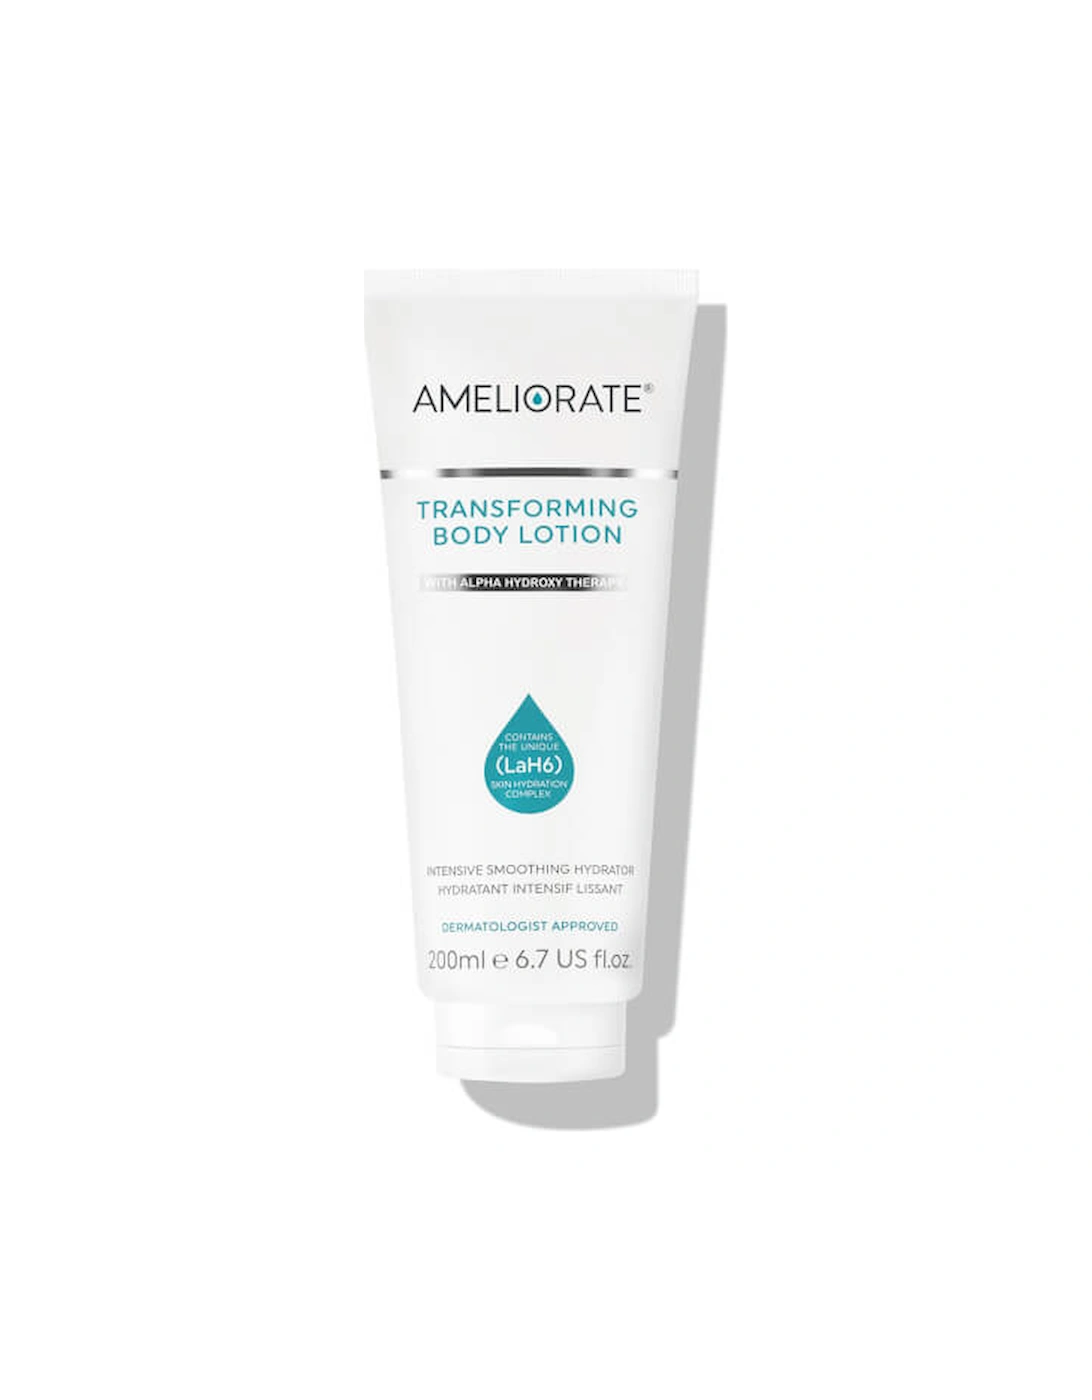 Transforming Body Lotion 200ml (Fragrance Free) - AMELIORATE, 2 of 1